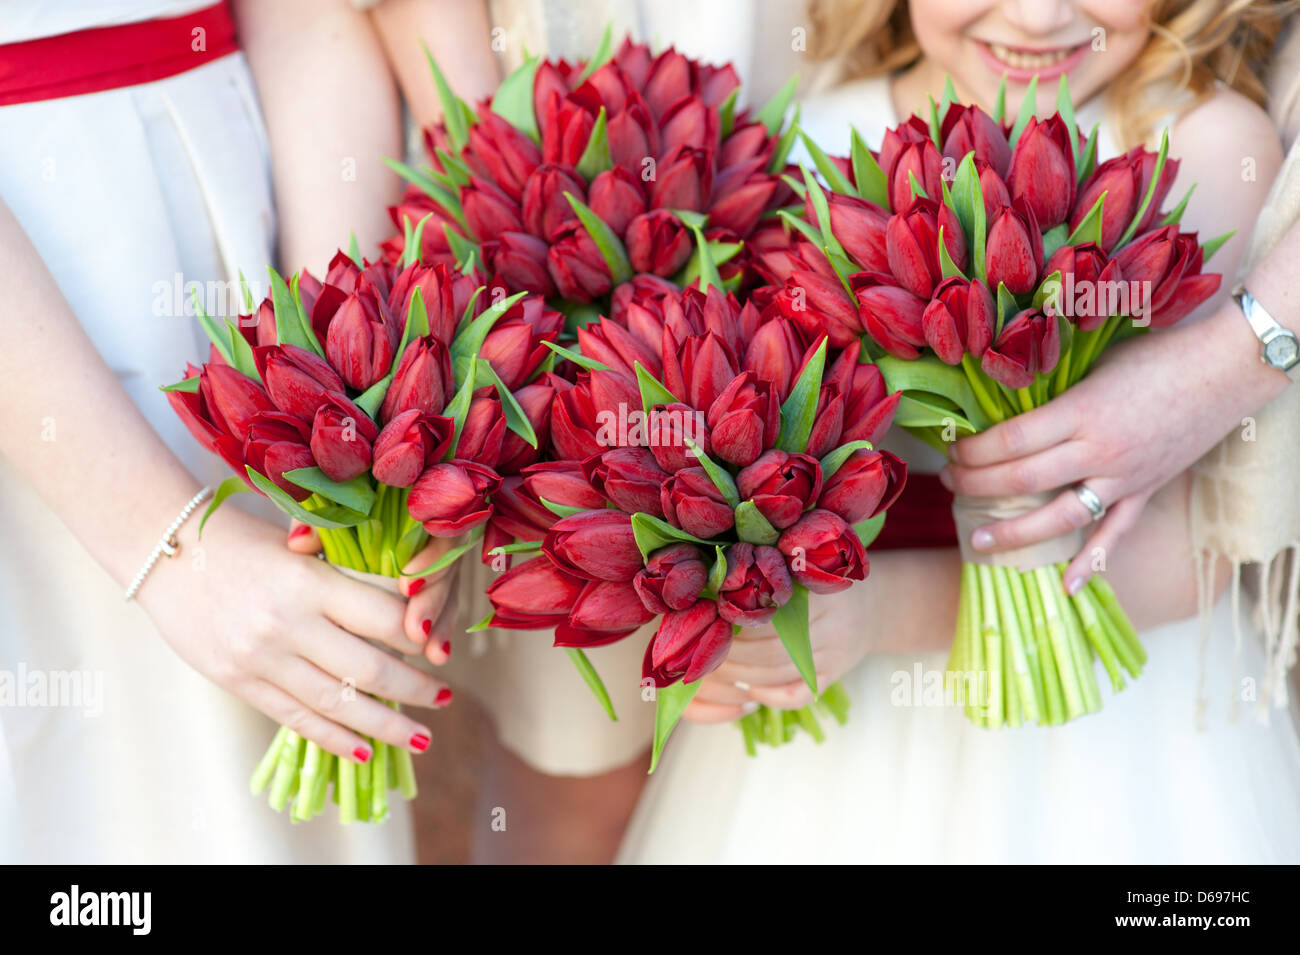 bridesmaids holding wedding bouquets of fresh springtime red tulips Stock Photo